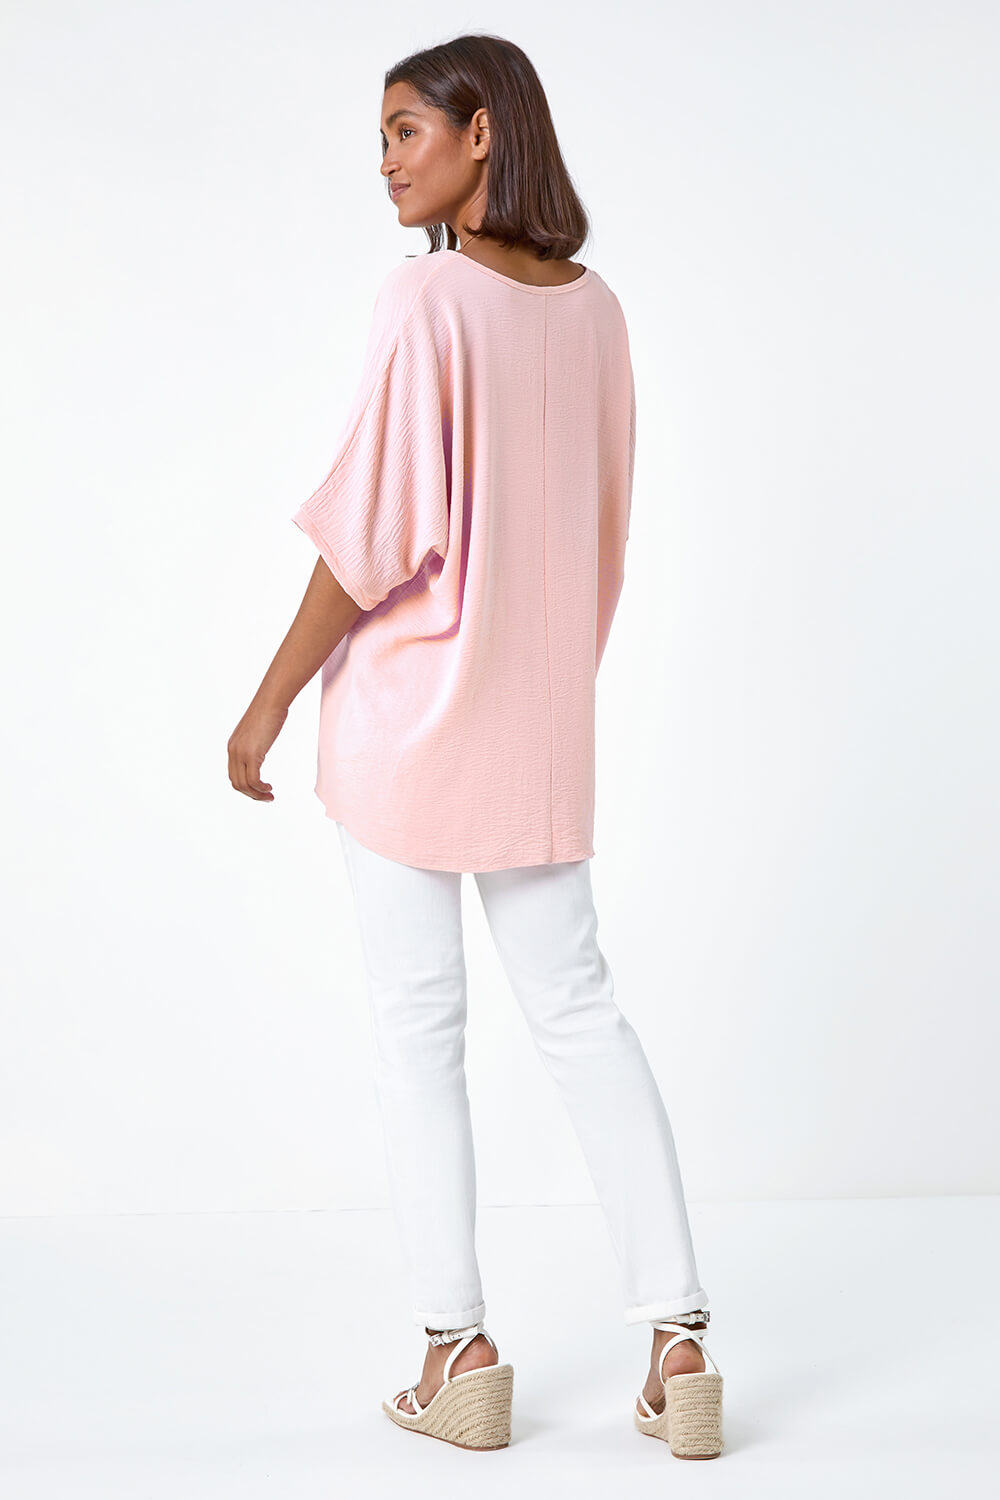 PINK Plain Tunic Top with Necklace, Image 3 of 5